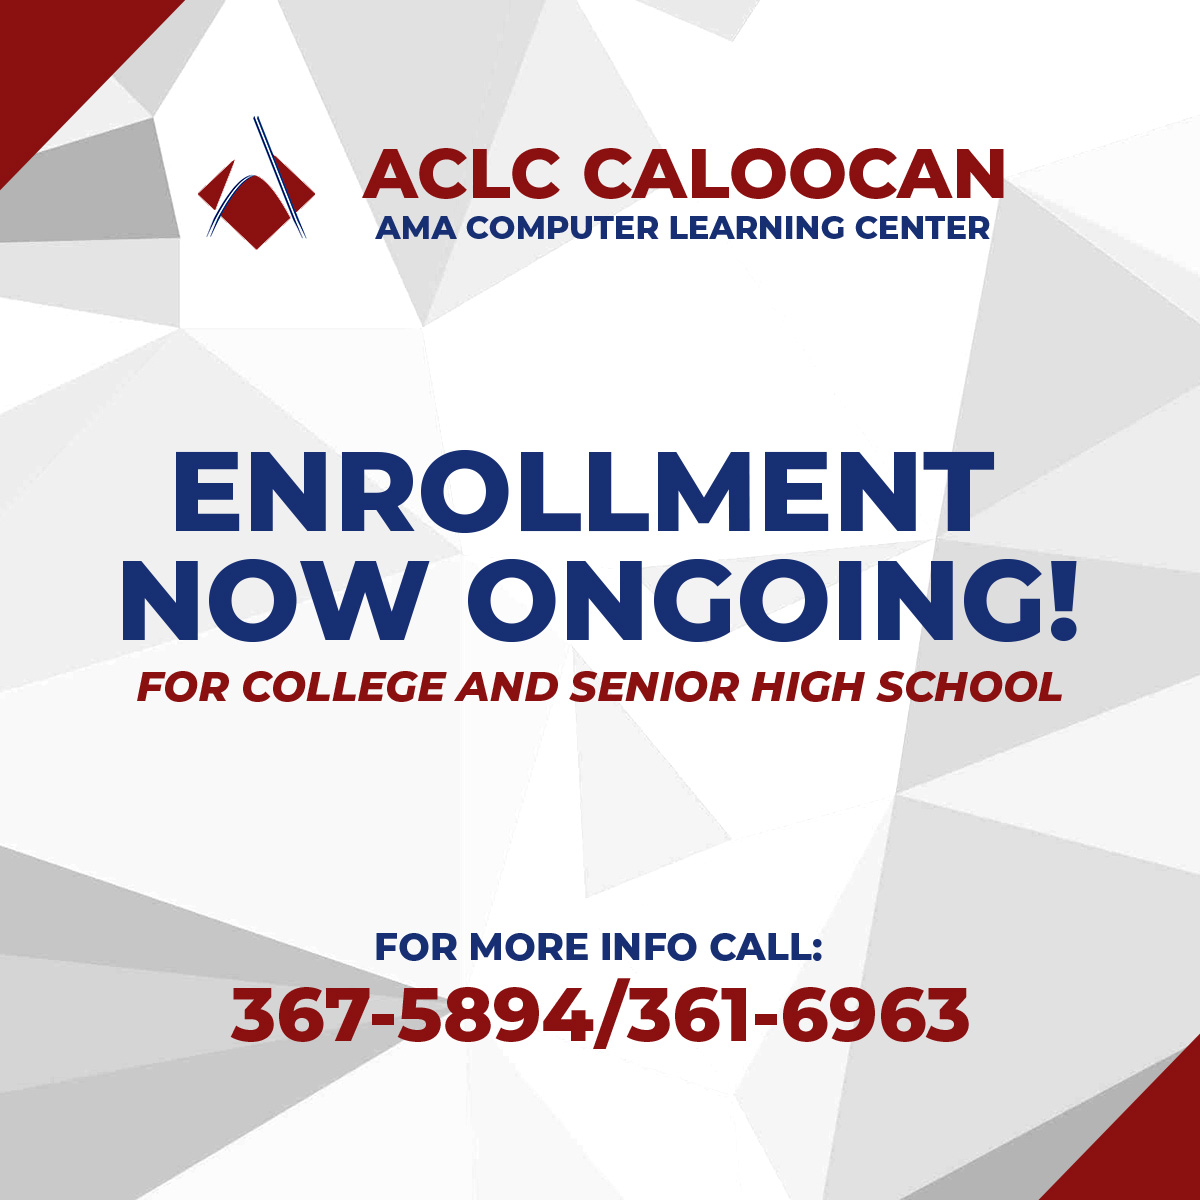 For inquiries please visit ACLC CALOOCAN located at 419 D&I BLDG. EDSA AVE CALOOCAN CITY (BESIDE OF SHAKEYS MCU) Friday from 8am-5pm and Saturday 8am-12nn. You may also call or text 0998-399-0036.

#EducatingTheNation
#ACLCCaloocan

See you!!!